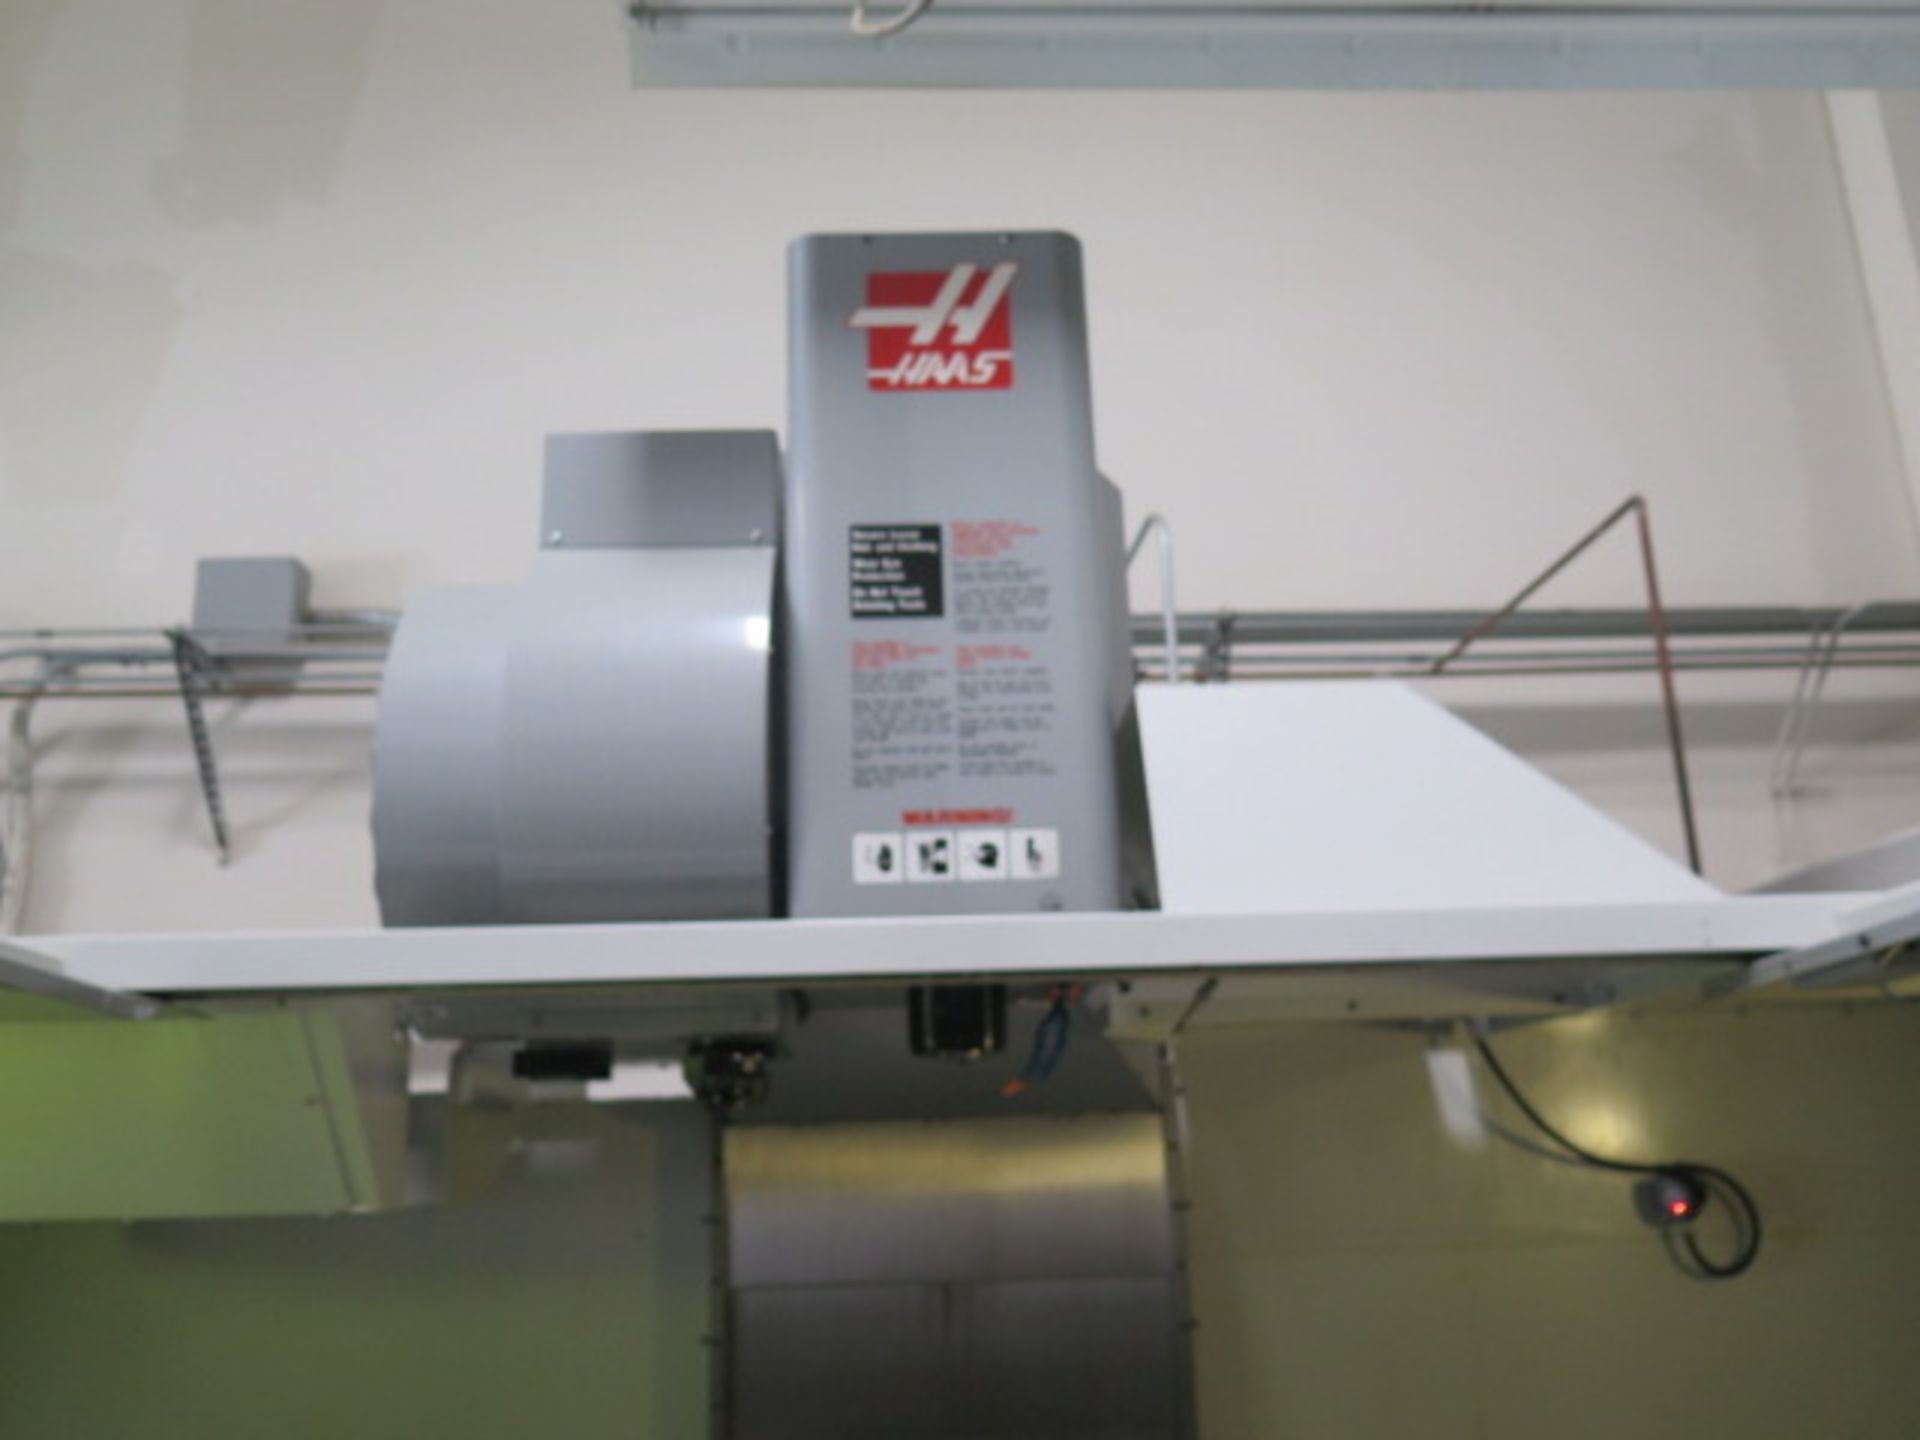 2008 Haas VF-6/40 CNC Vertical Machining Center s/n 1071543 w/ Haas Controls, Hand Wheel, 24-Station - Image 8 of 26